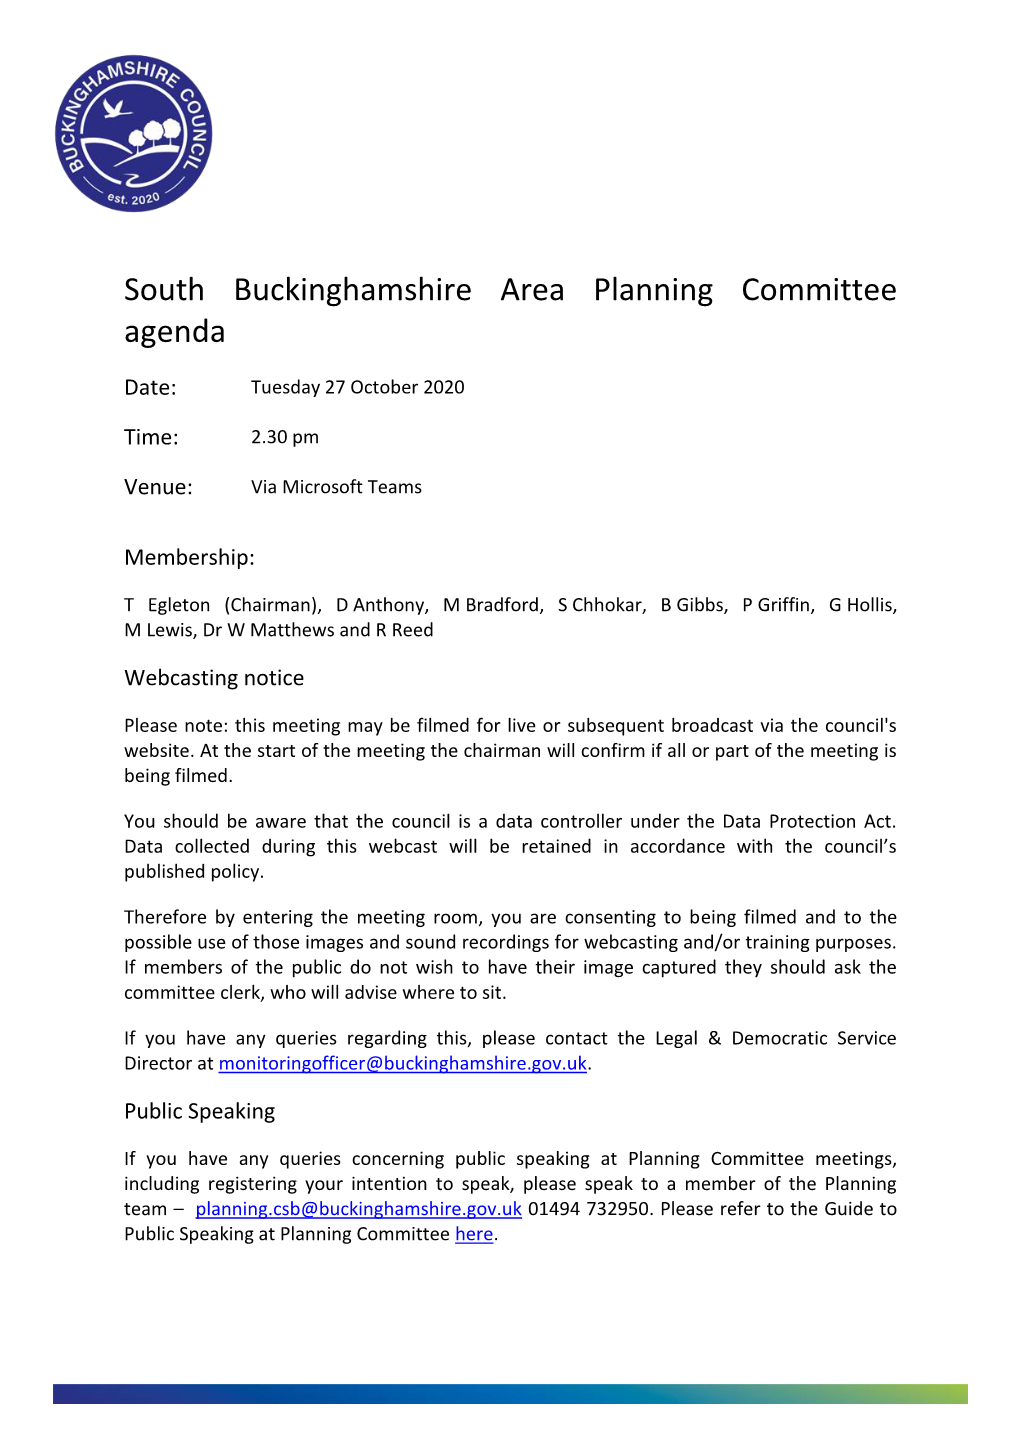 (Public Pack)Agenda Document for South Buckinghamshire Area Planning Committee, 27/10/2020 14:30